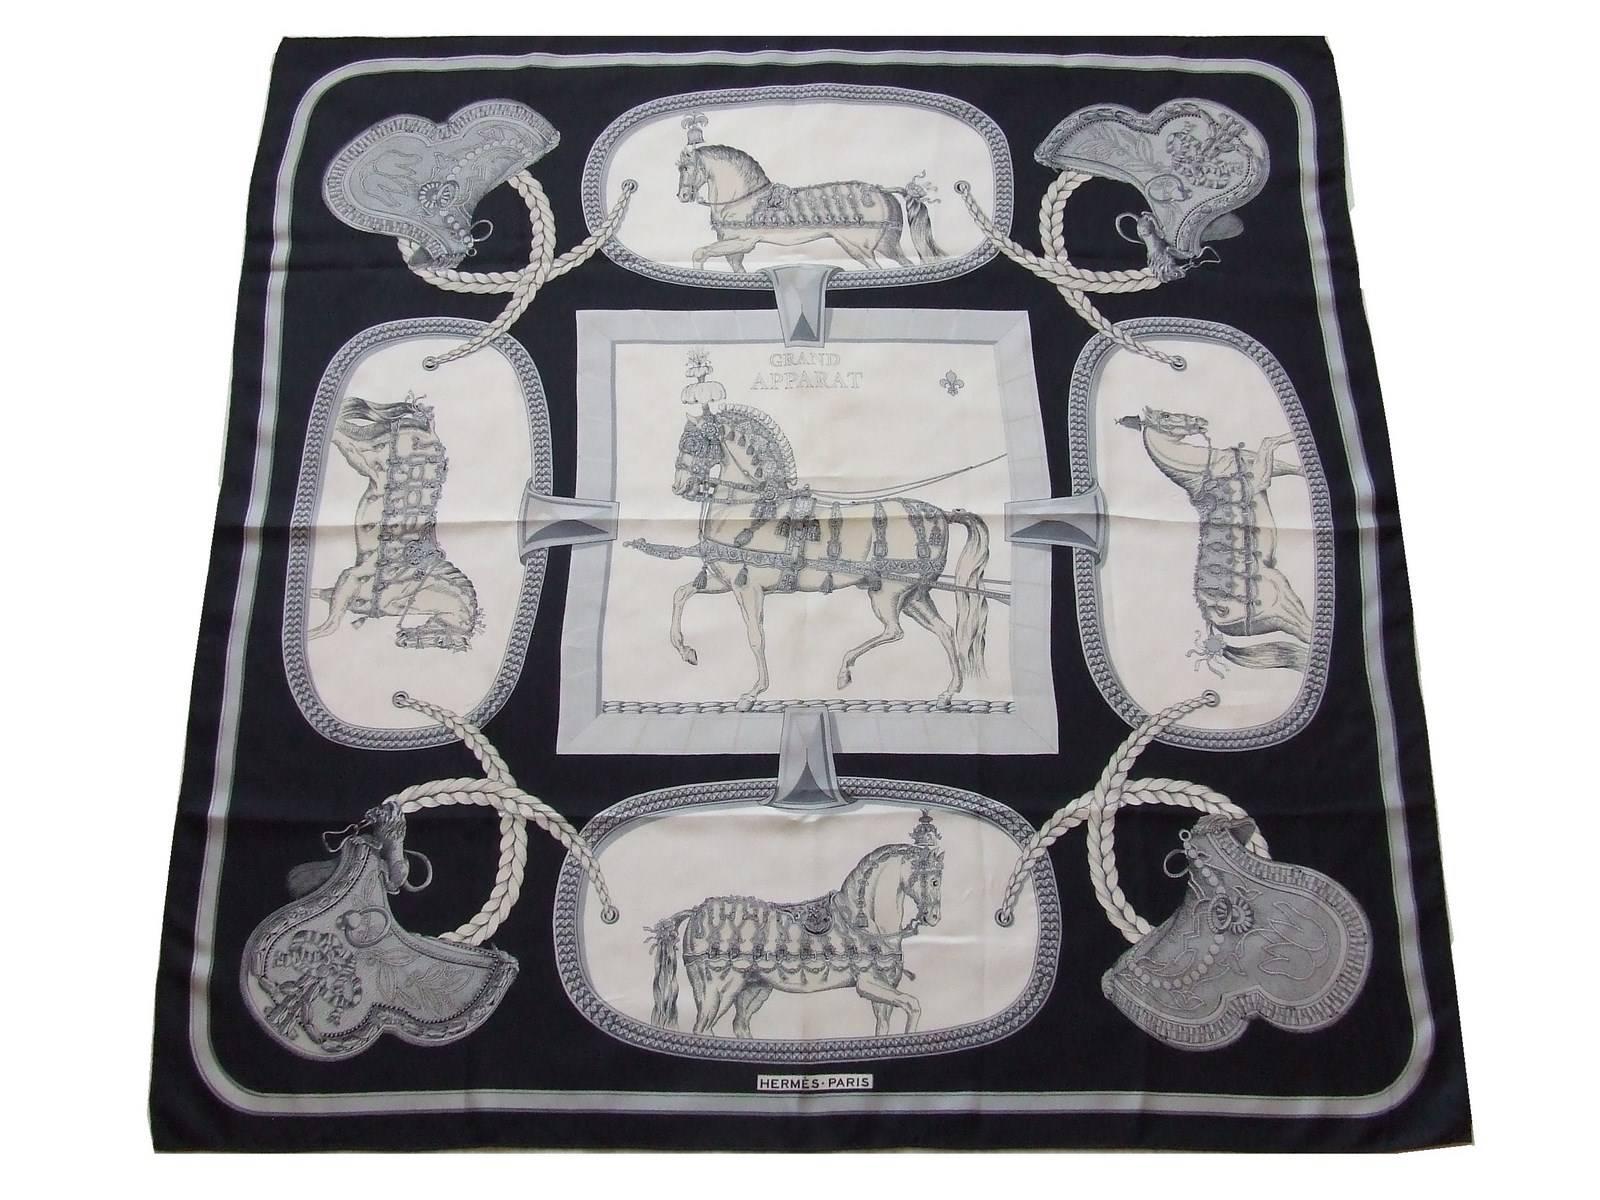 GORGEOUS AUTHENTIC HERMES SCARF

Called 